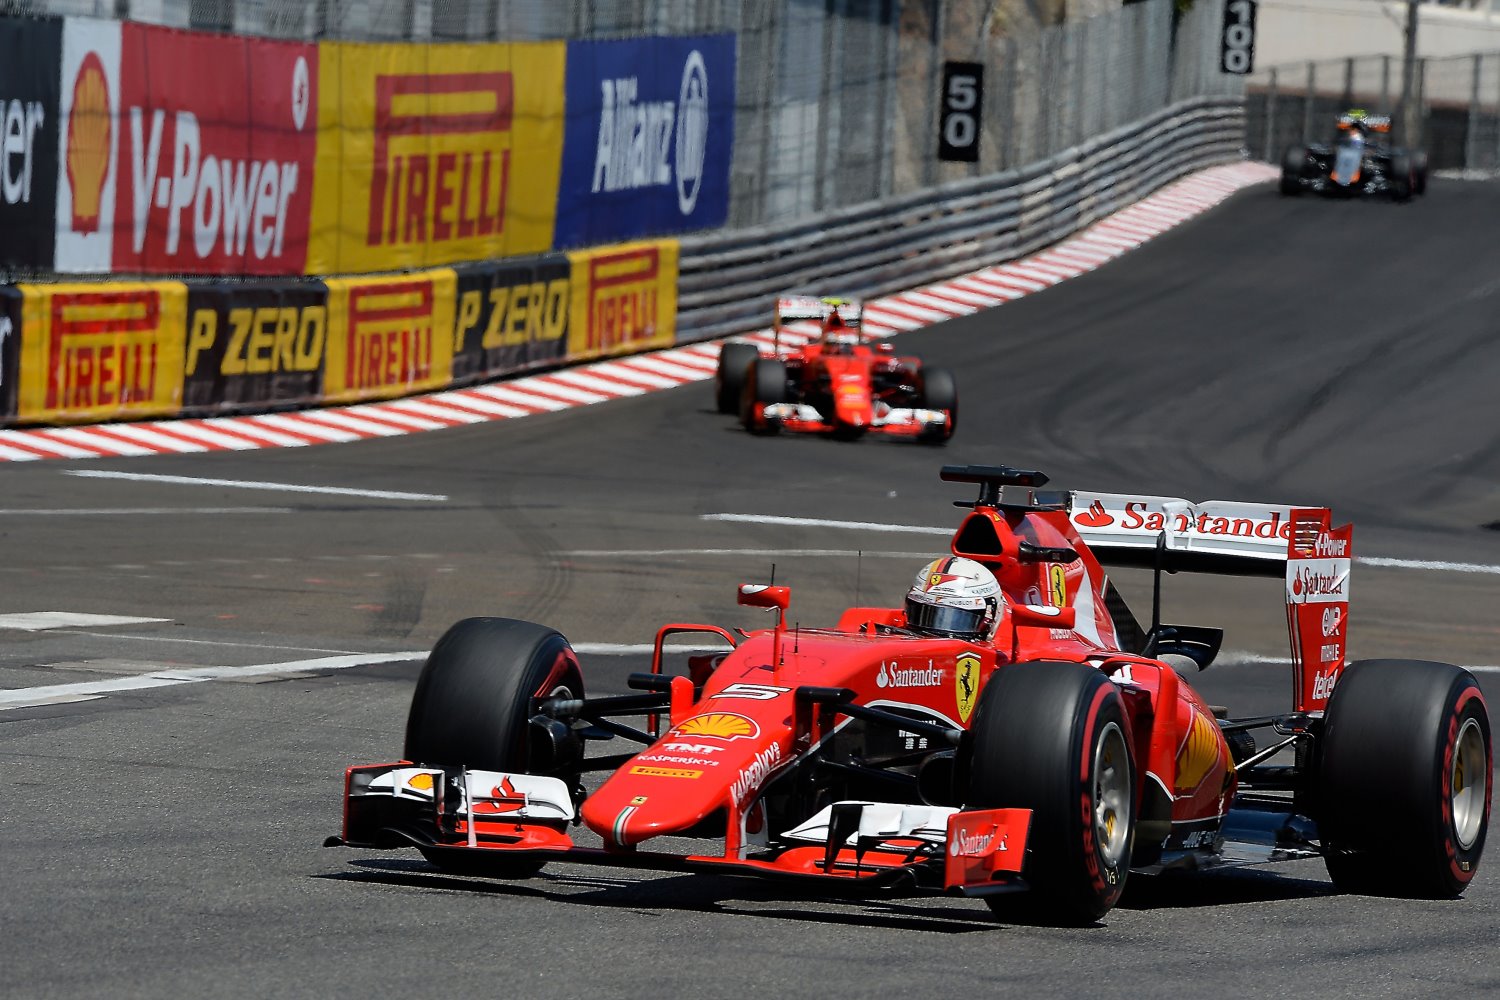 Hass' association with Ferrari should pay dividends